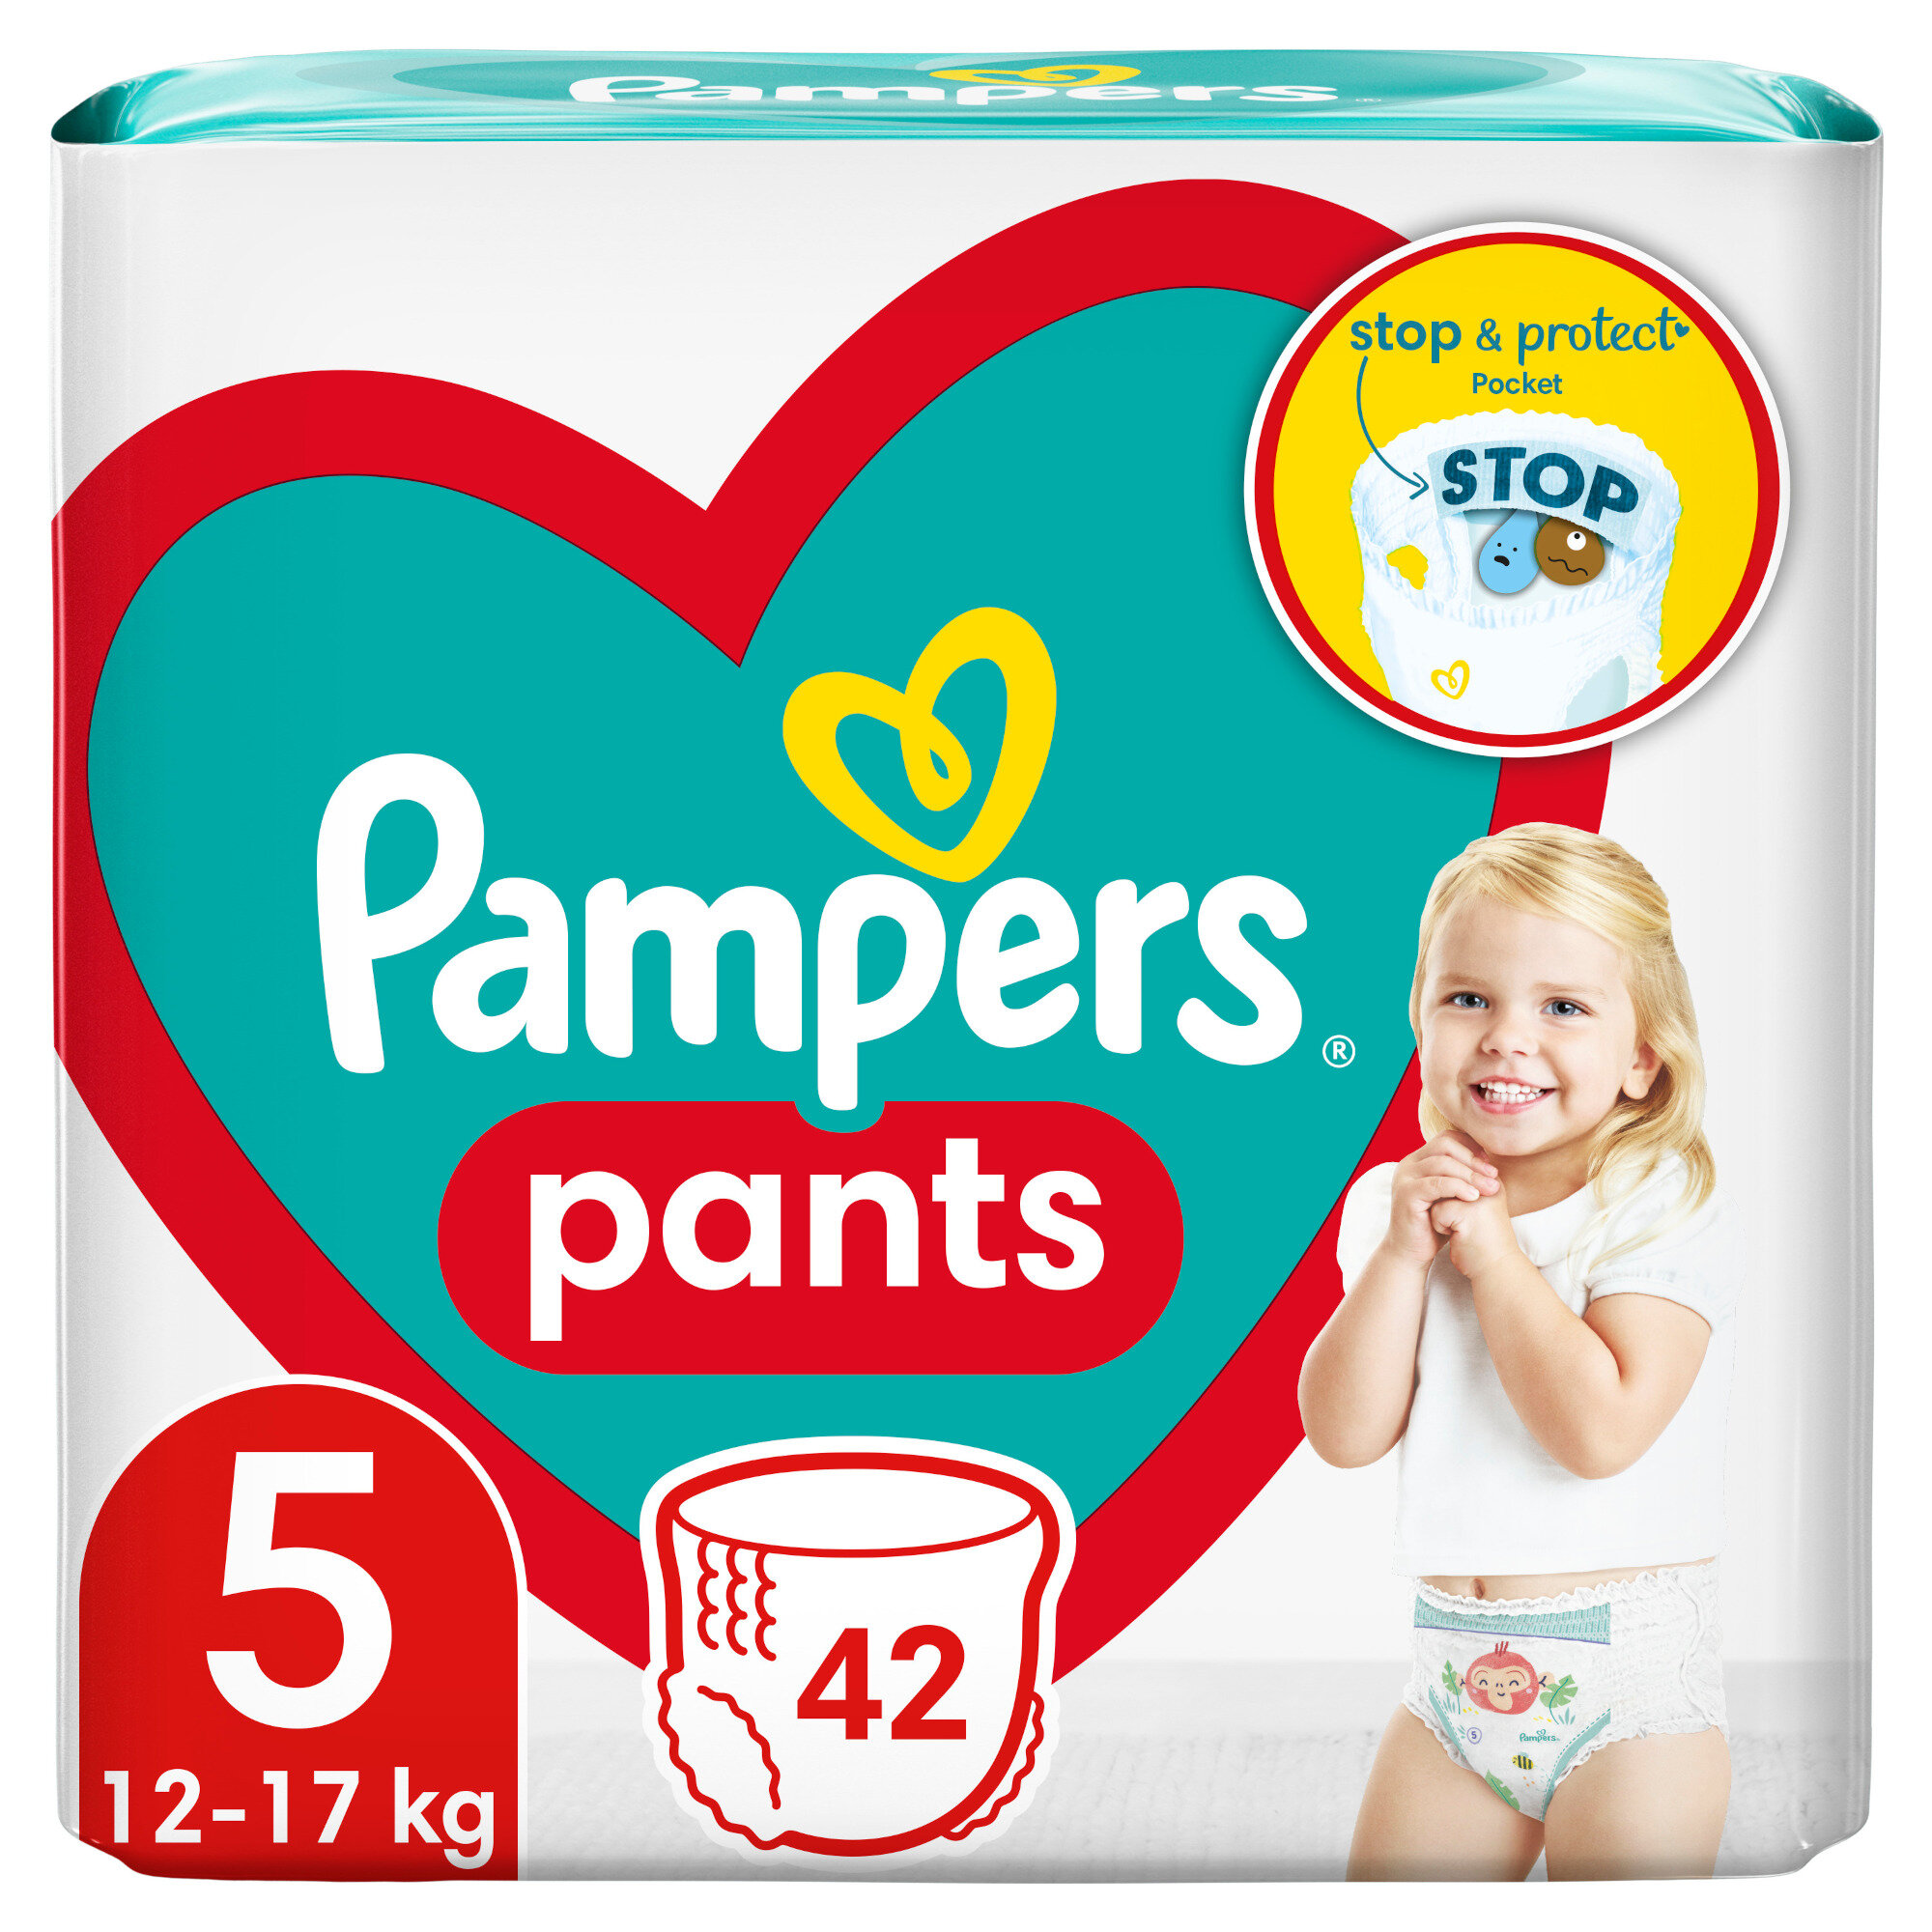 pampers box 2